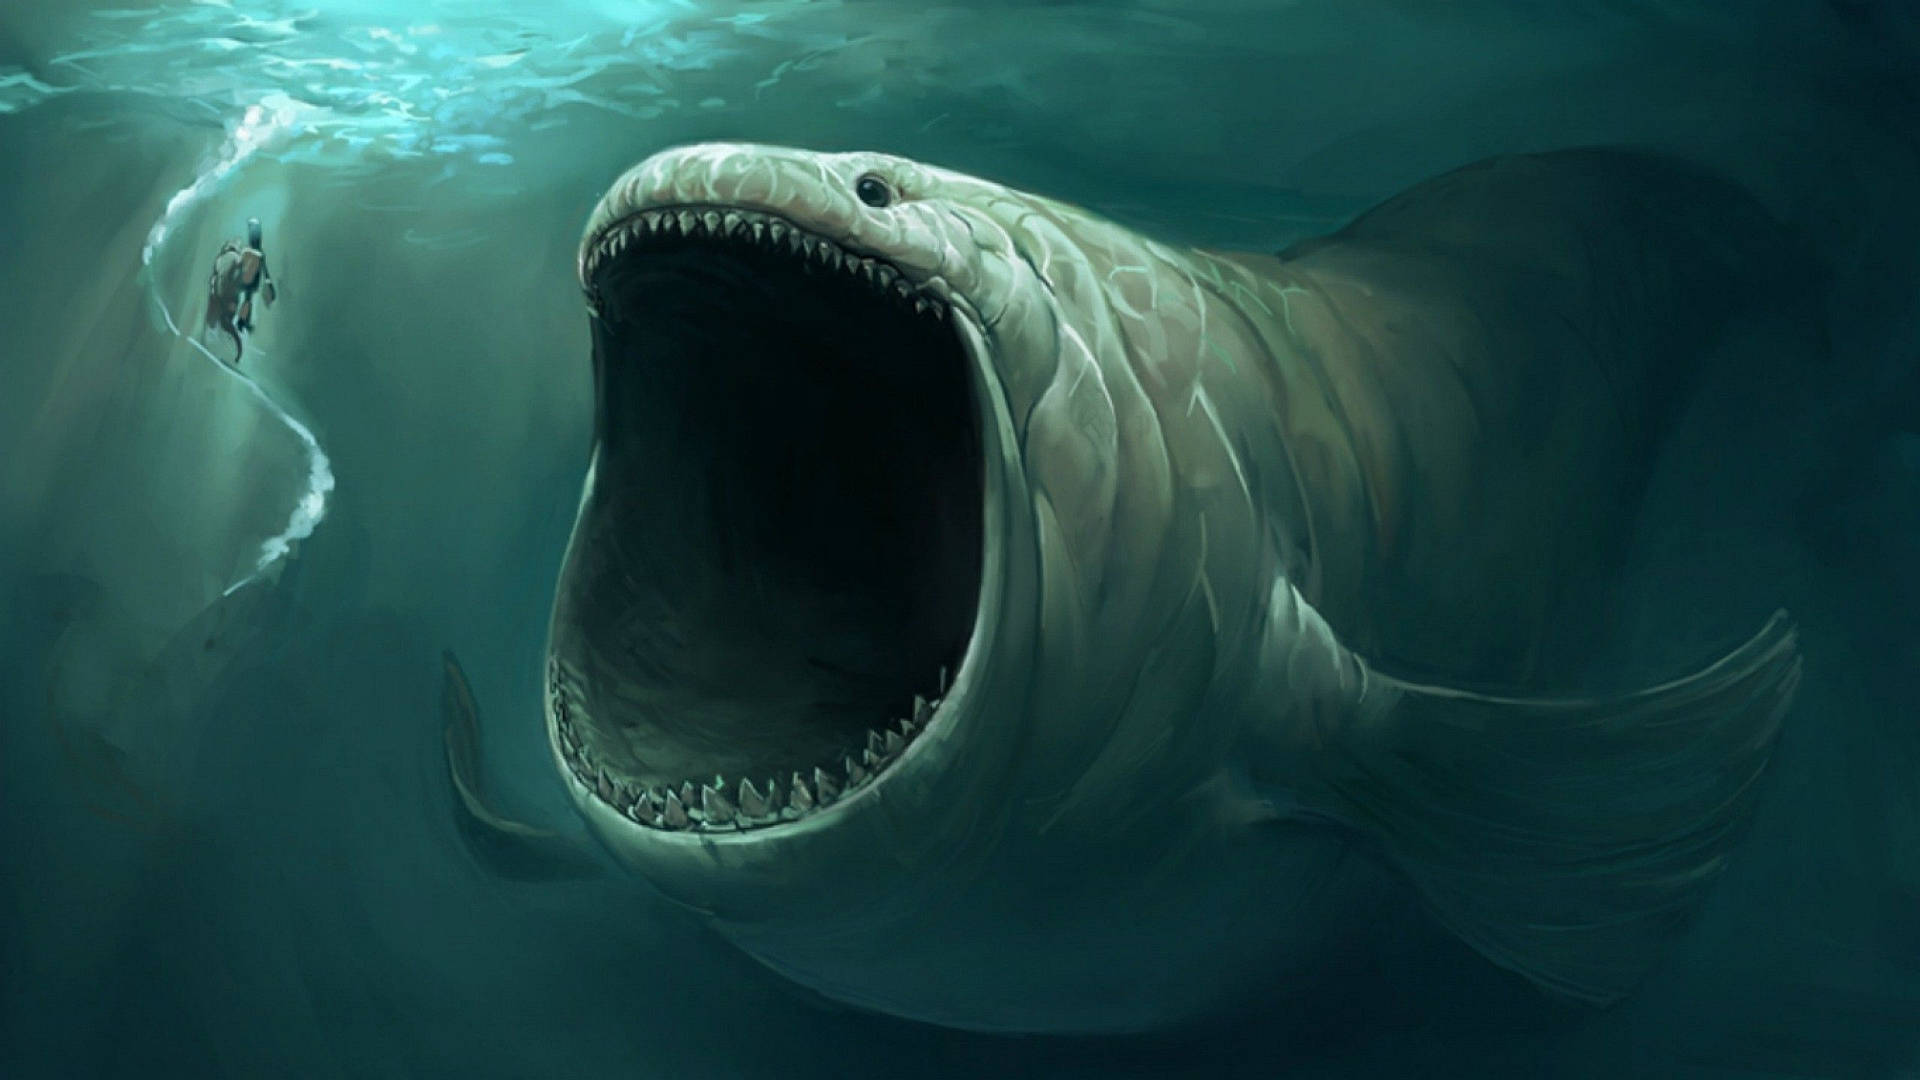 Scary Giant Underwater Creature Wallpaper